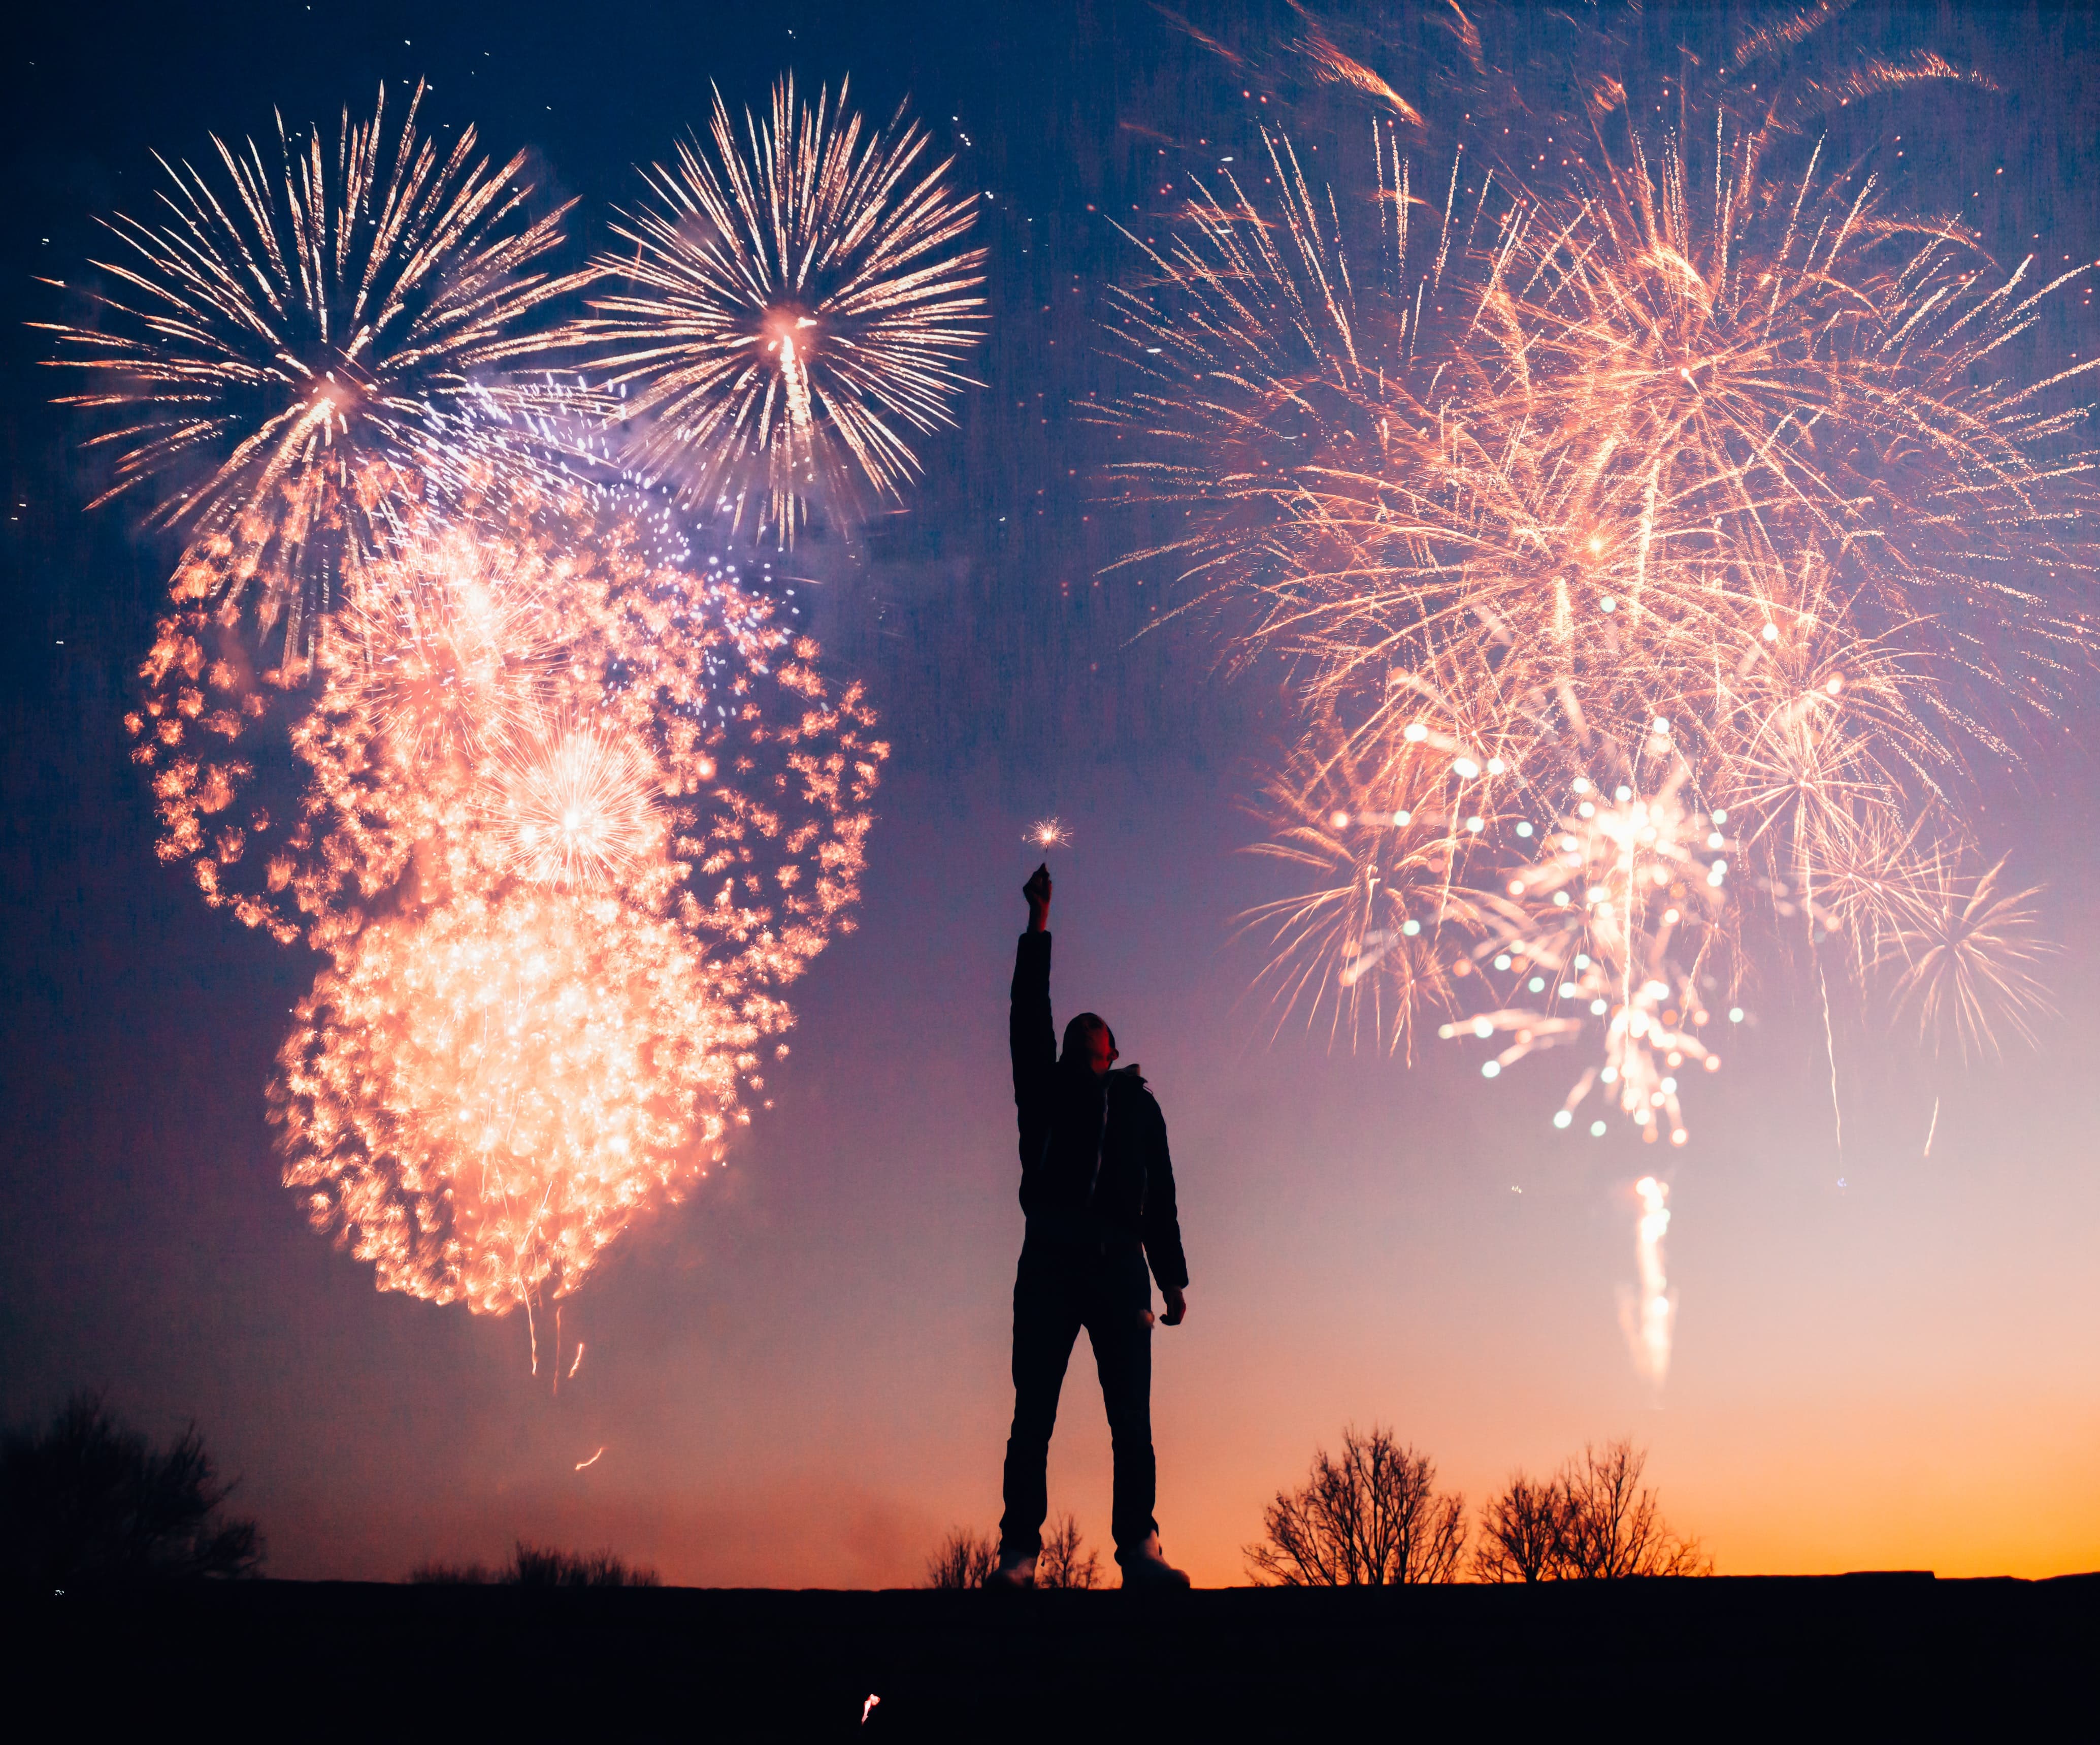 Multiple fireworks in the sky with a man holding a sparkler on top of a hill at twilight